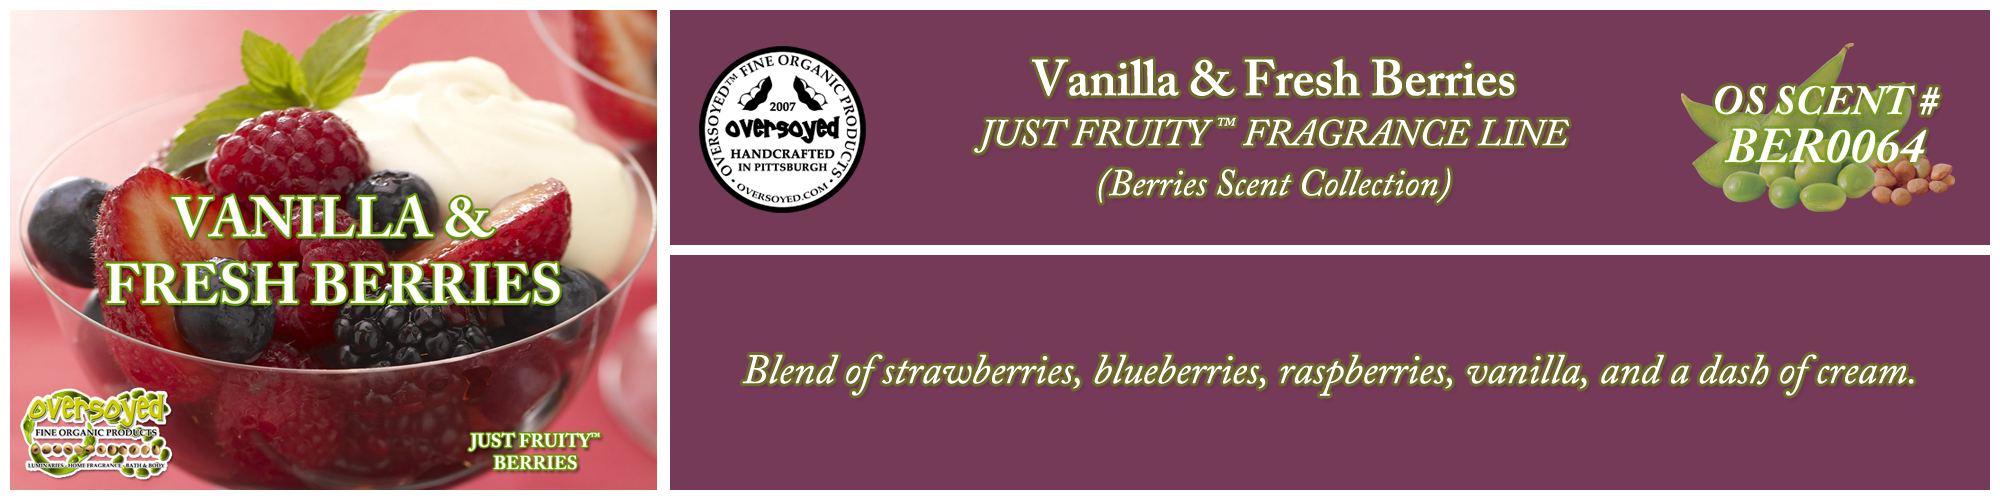 Vanilla & Fresh Berries Handcrafted Products Collection